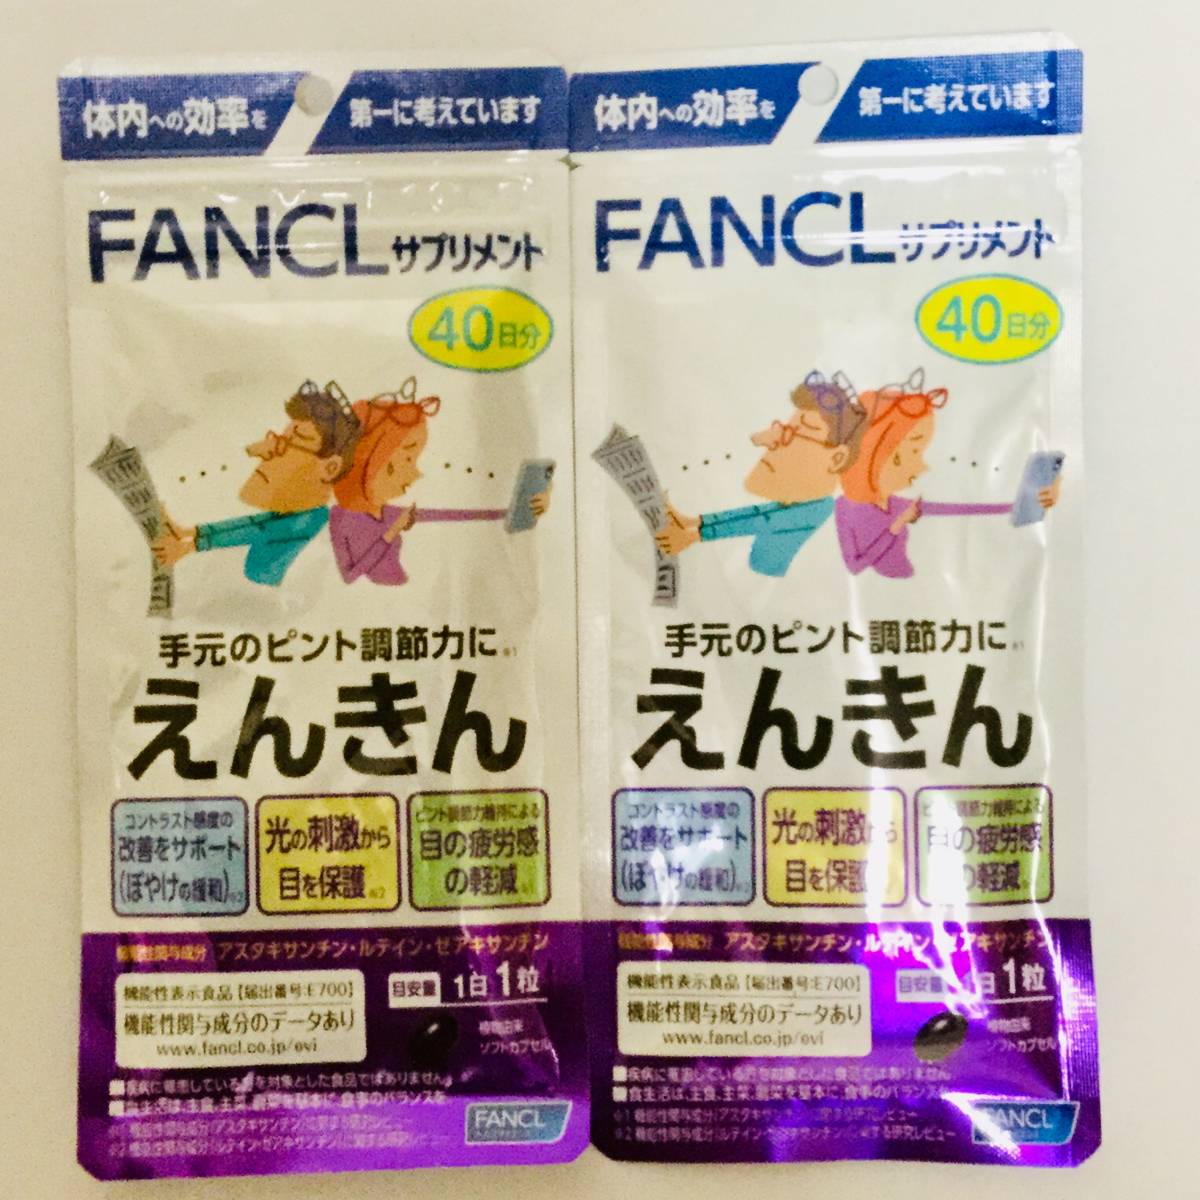 * new goods *FANCL Fancl ....40 day minute (40 bead )×2 sack set #yaf cat anonymity delivery correspondence : postage 140 jpy ~